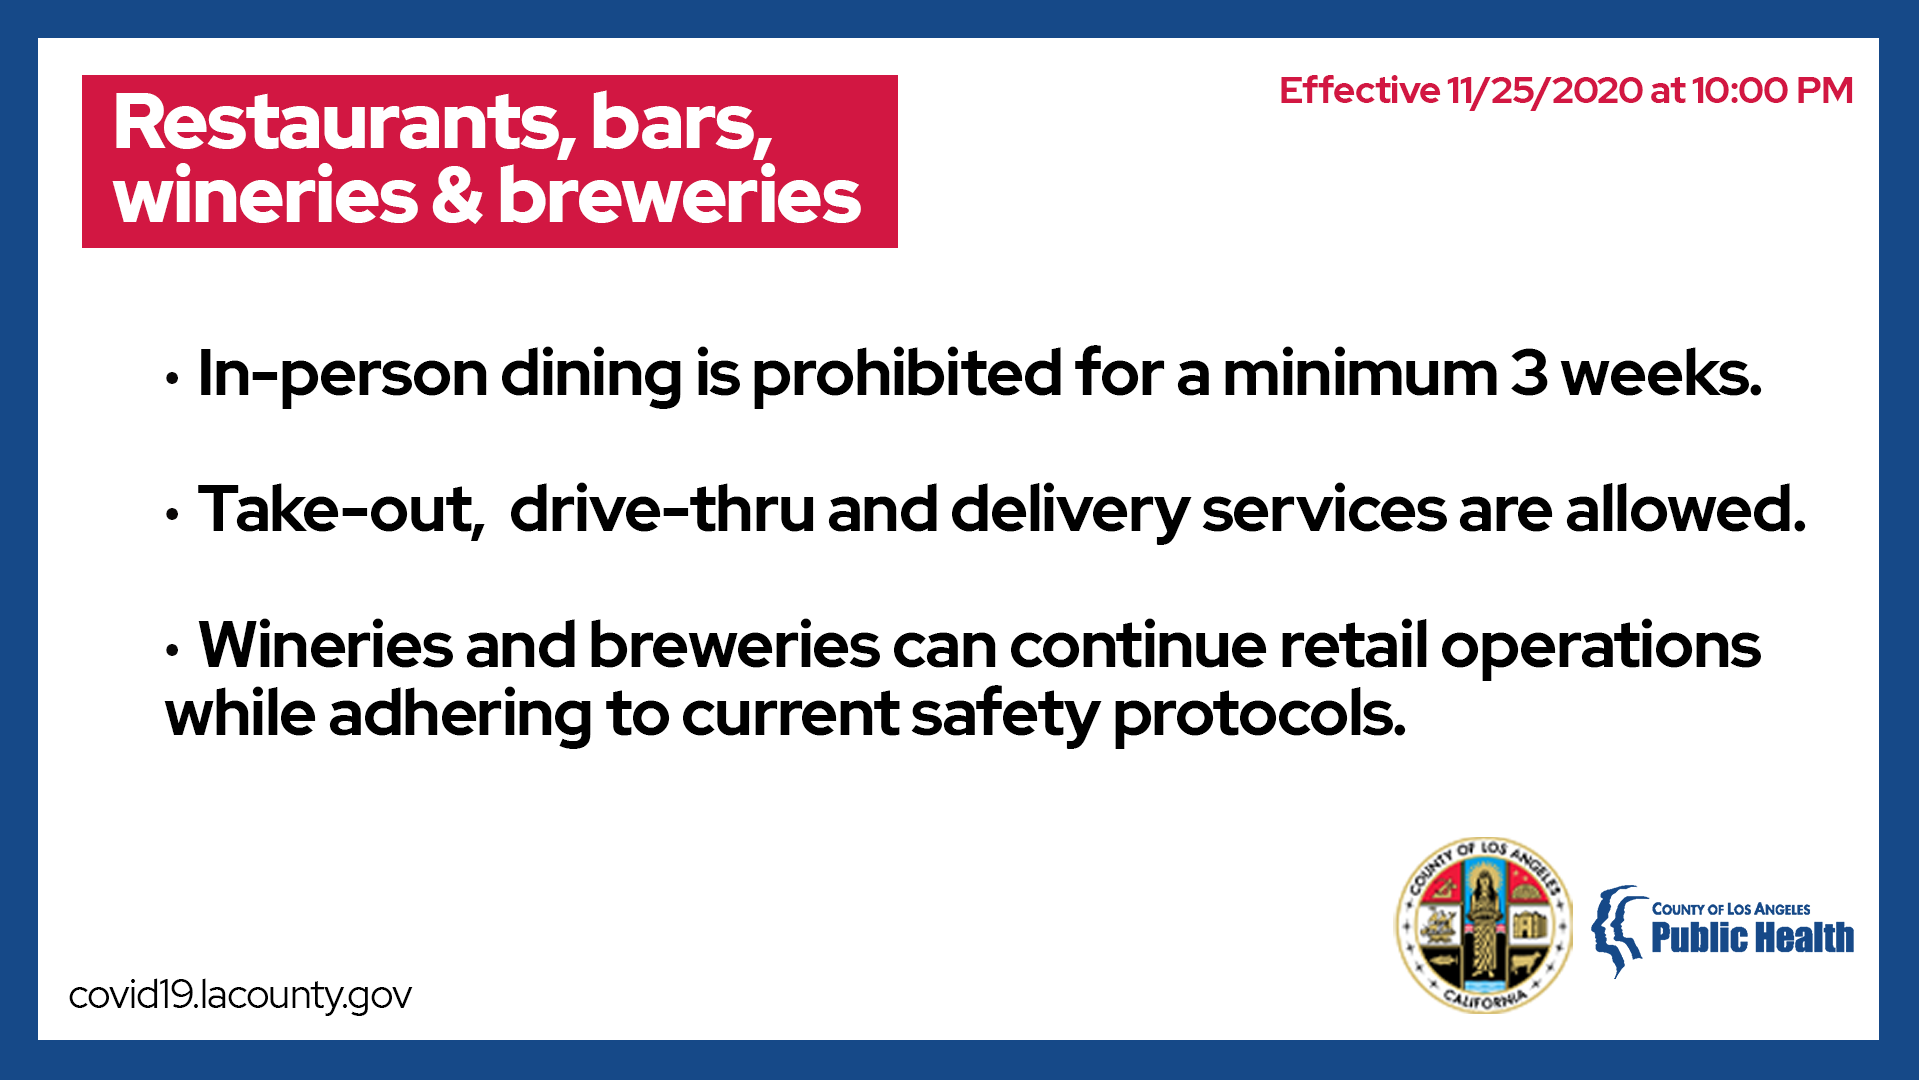 To reduce the possibility for crowding and the potential for exposures in settings where people are not wearing their face coverings, restaurants, breweries, wineries and bars will only be able to offer take-out, drive thru, and delivery services. Wineries and breweries may continue their retail operations adhering to current protocols.  In person dining will not be allowed, at minimum, for the next 3 weeks.